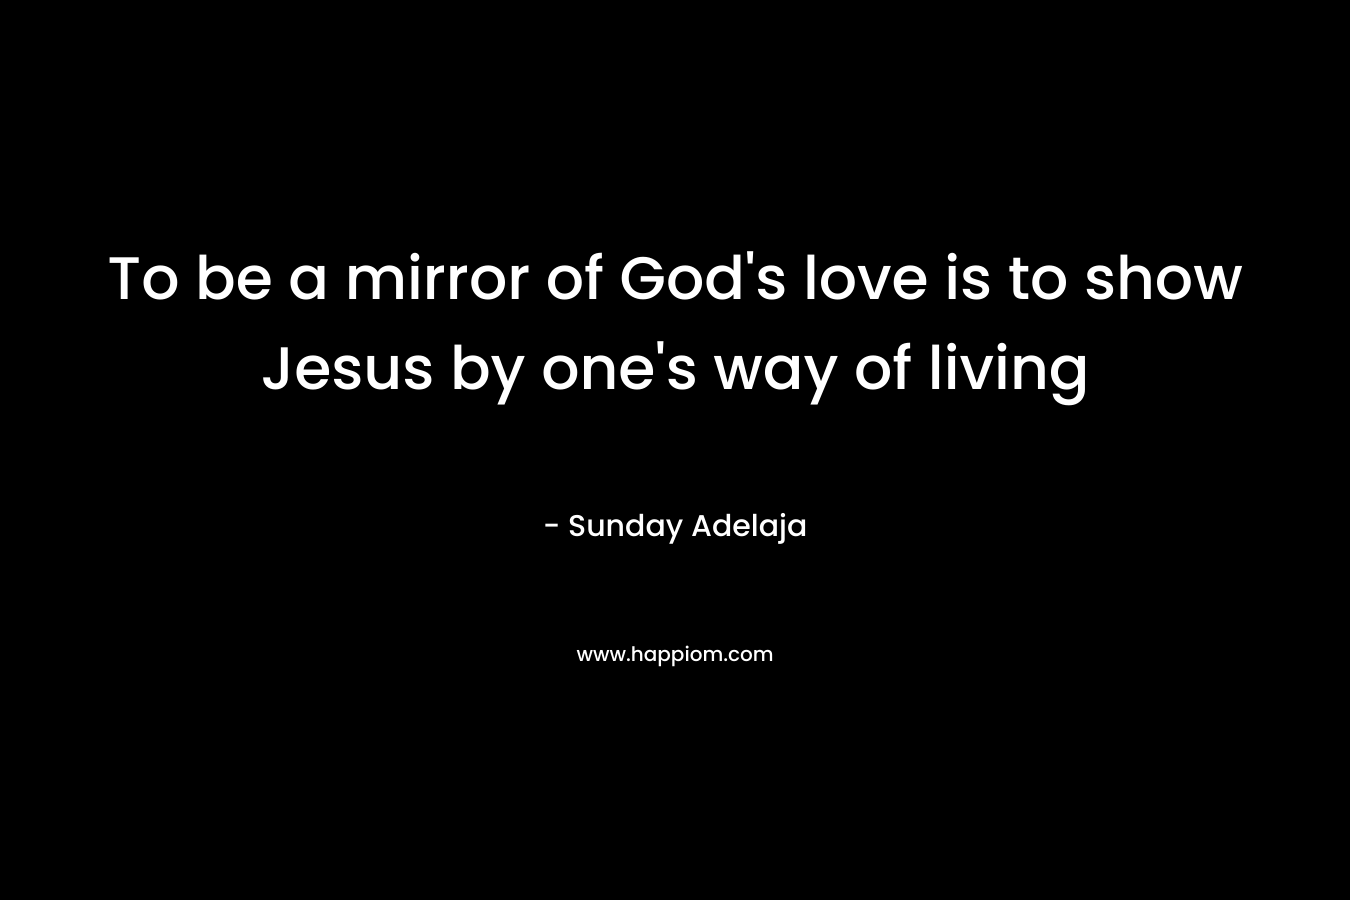 To be a mirror of God's love is to show Jesus by one's way of living